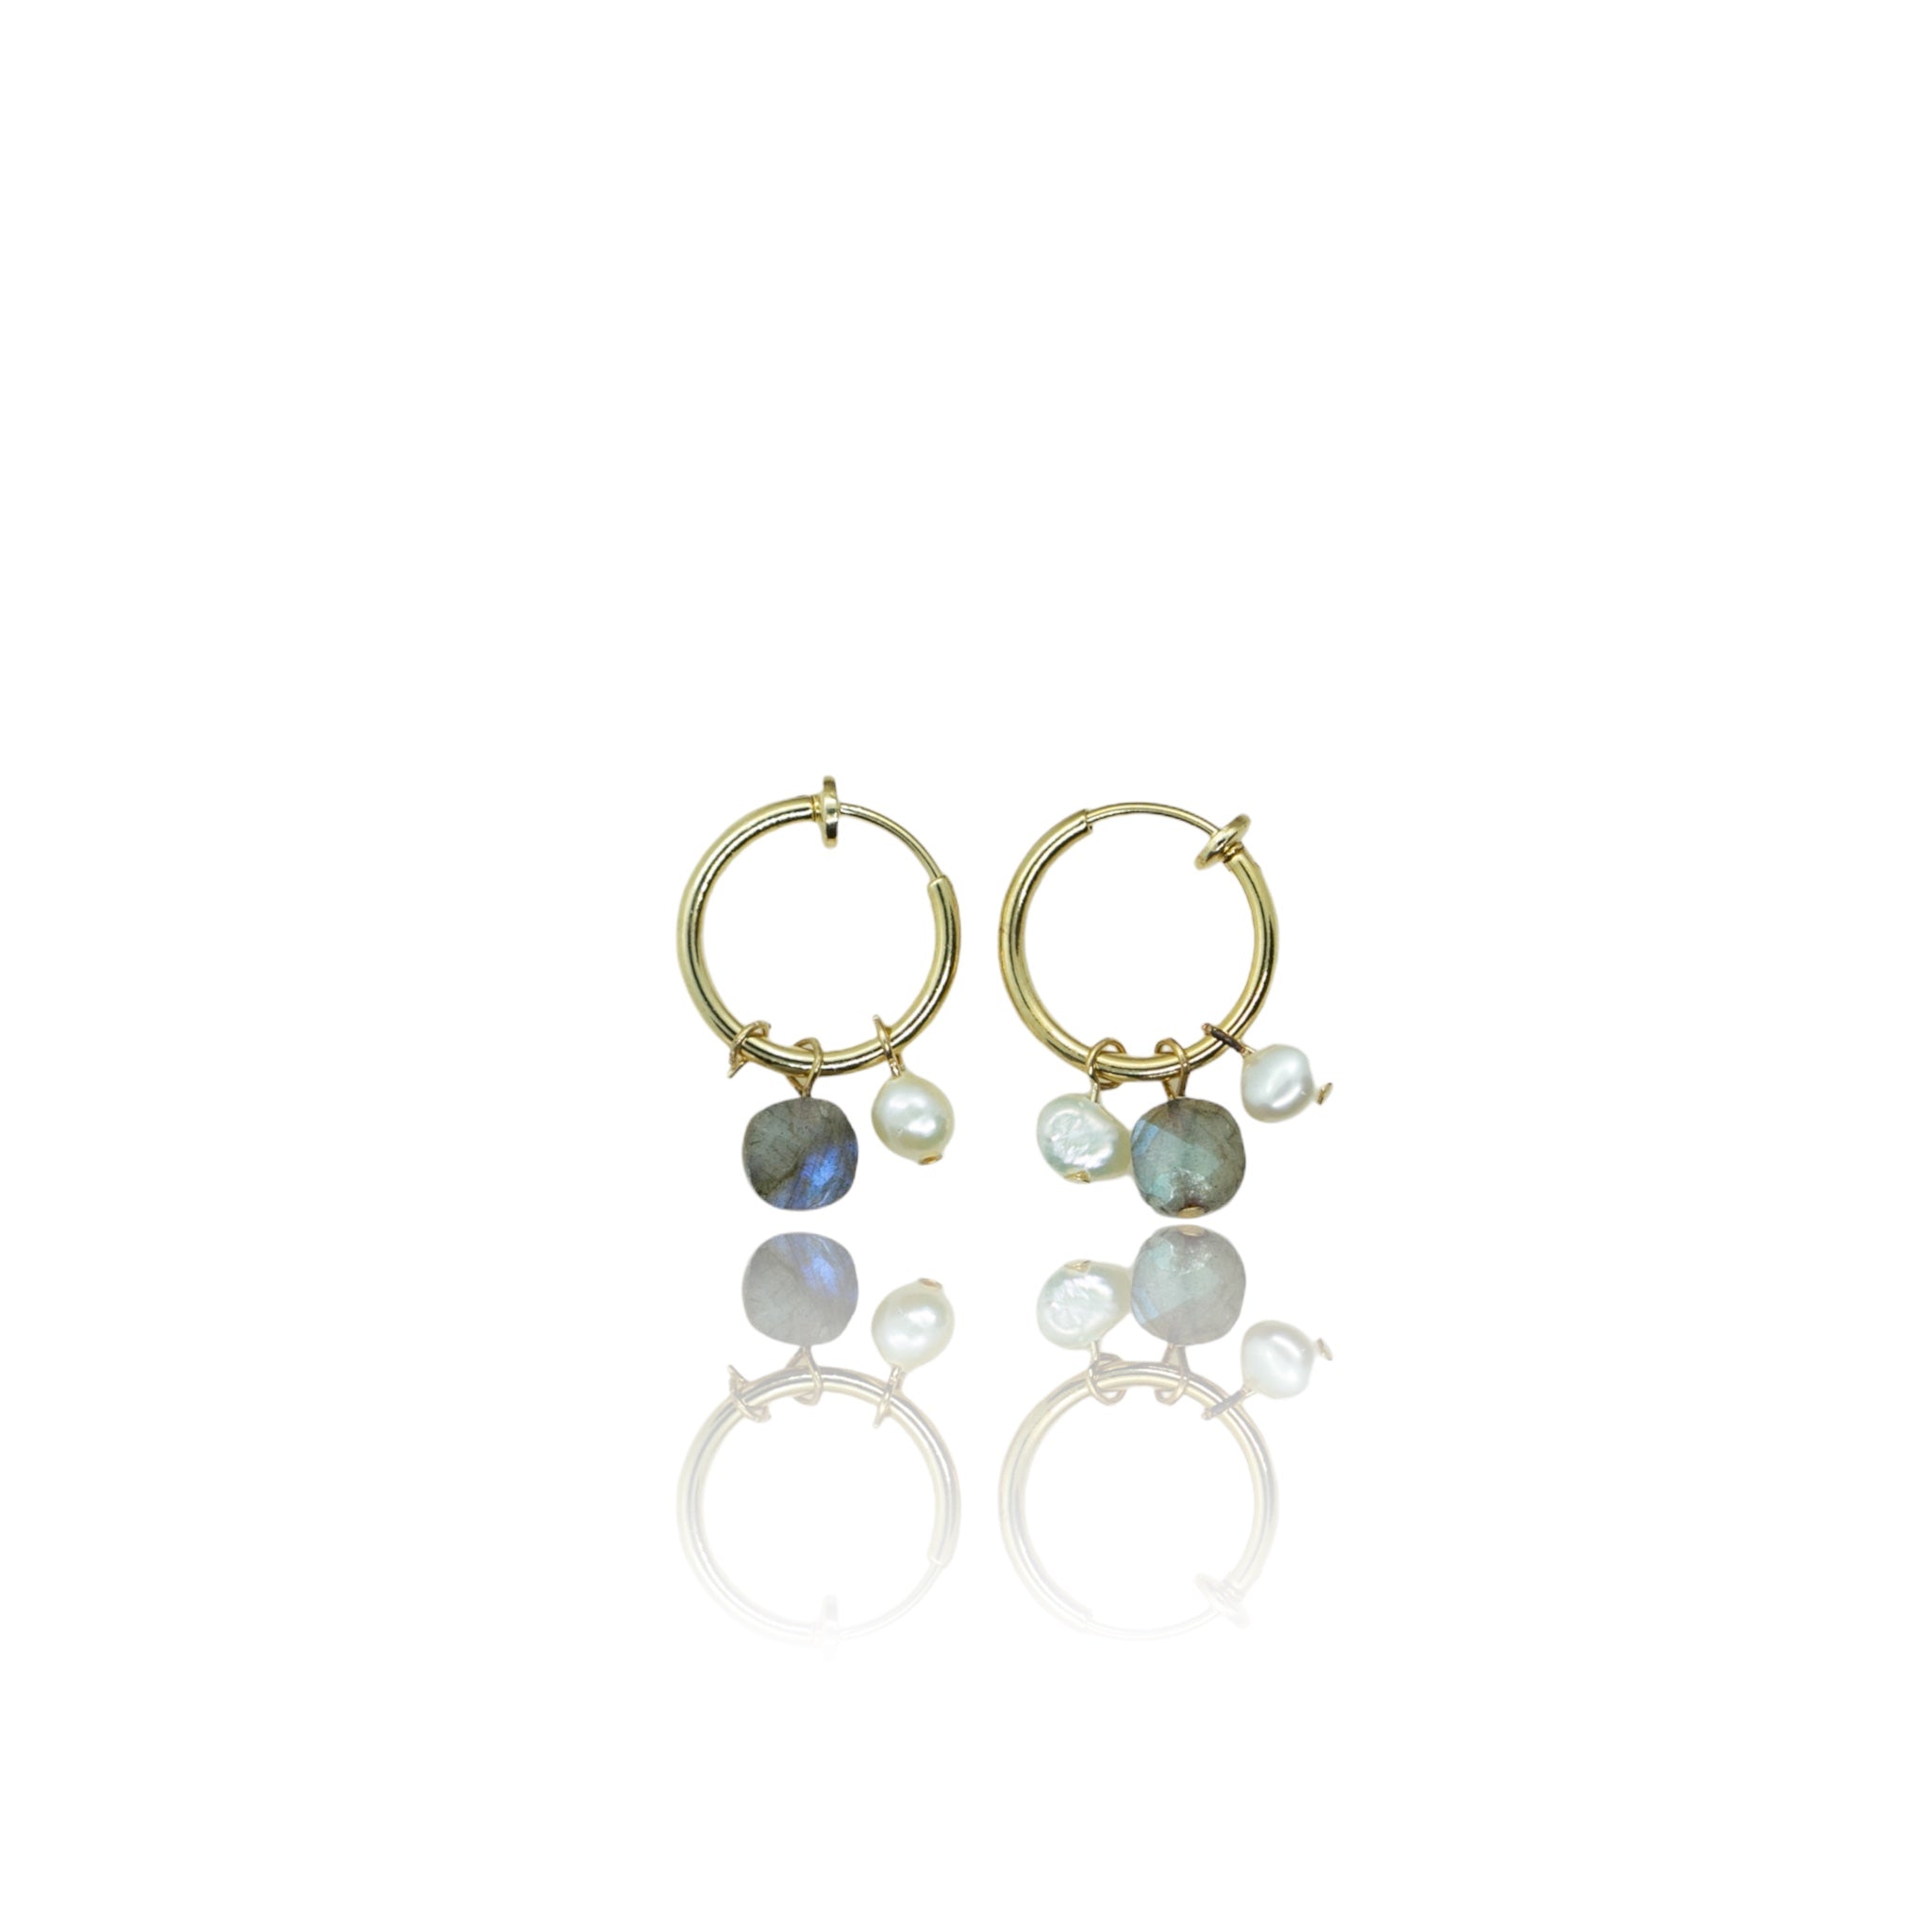 Labradorite Gemstone and Pearls Clip On earrings